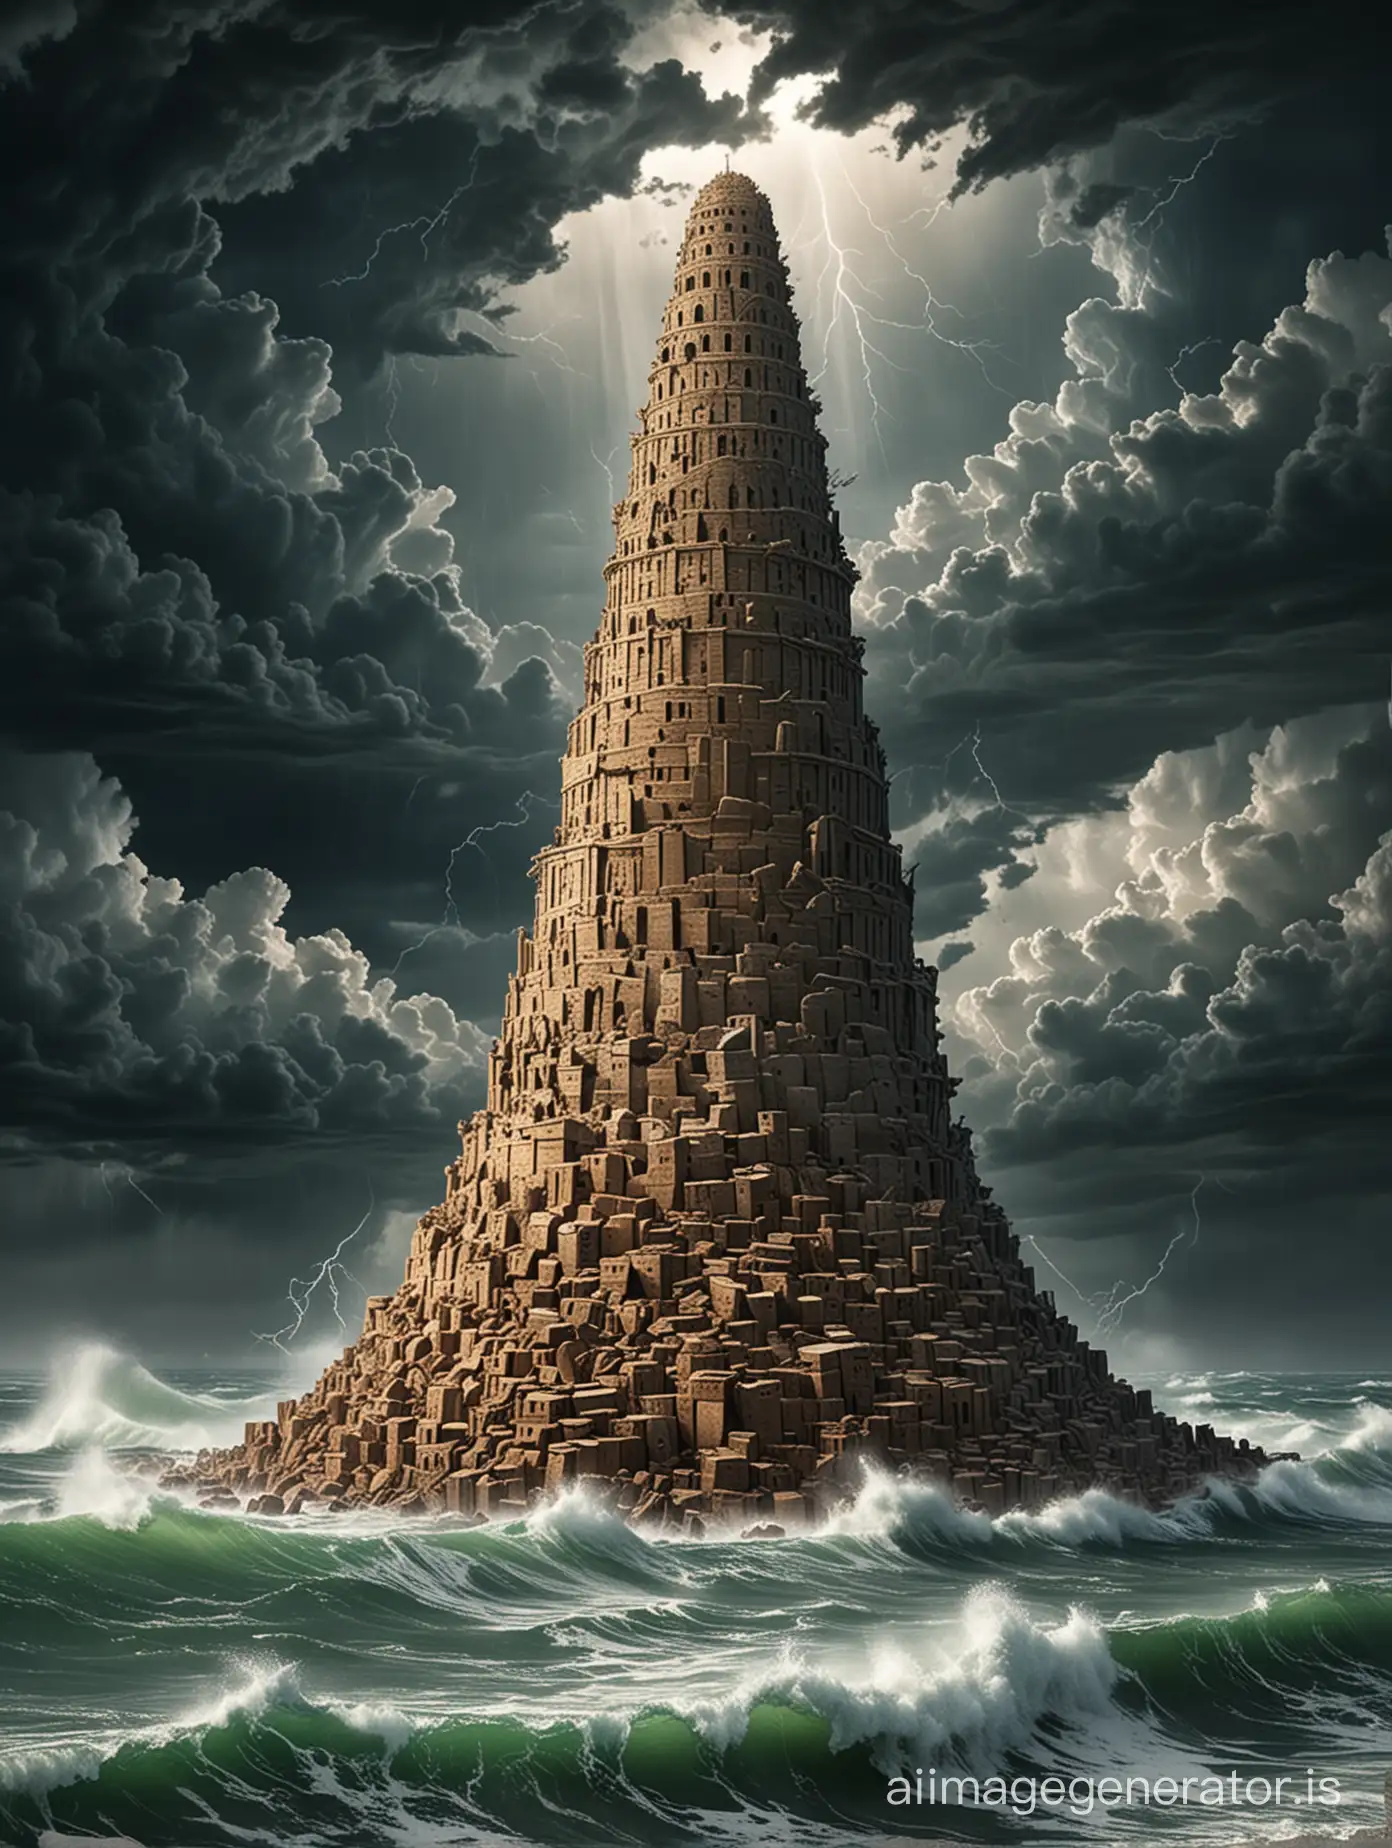 Huge biblical Tower of Babel made entirely of stone stands on the ocean where a storm rages, on the horizon a tornado is seen